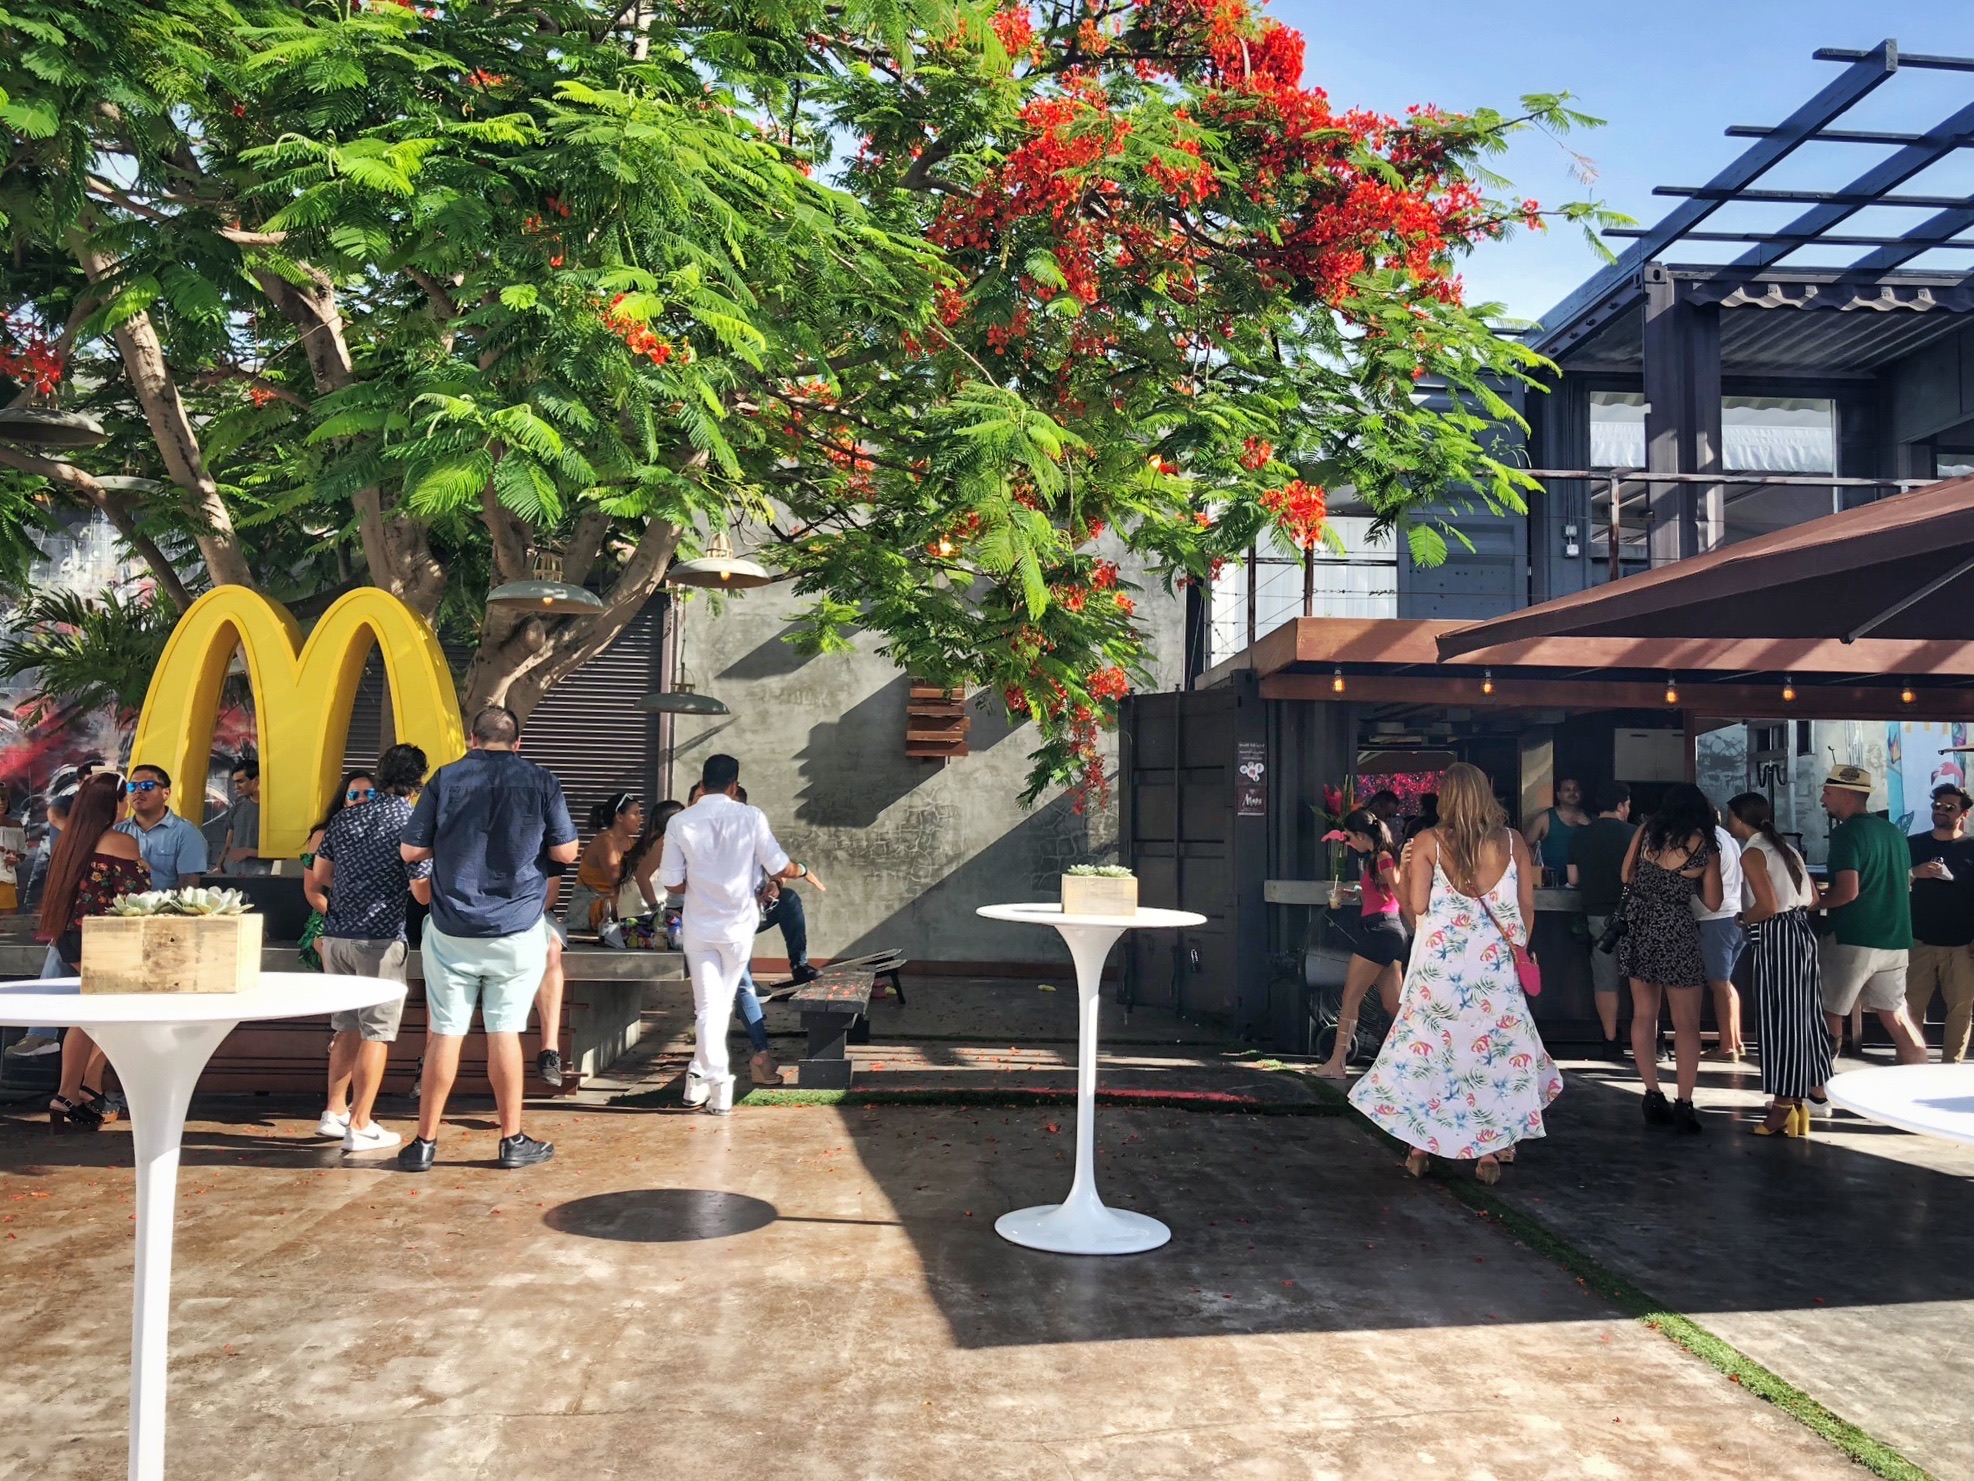  Outdoor McDonald’s Corporate Event in Wynwood at MAPS Backlot in South Florida 